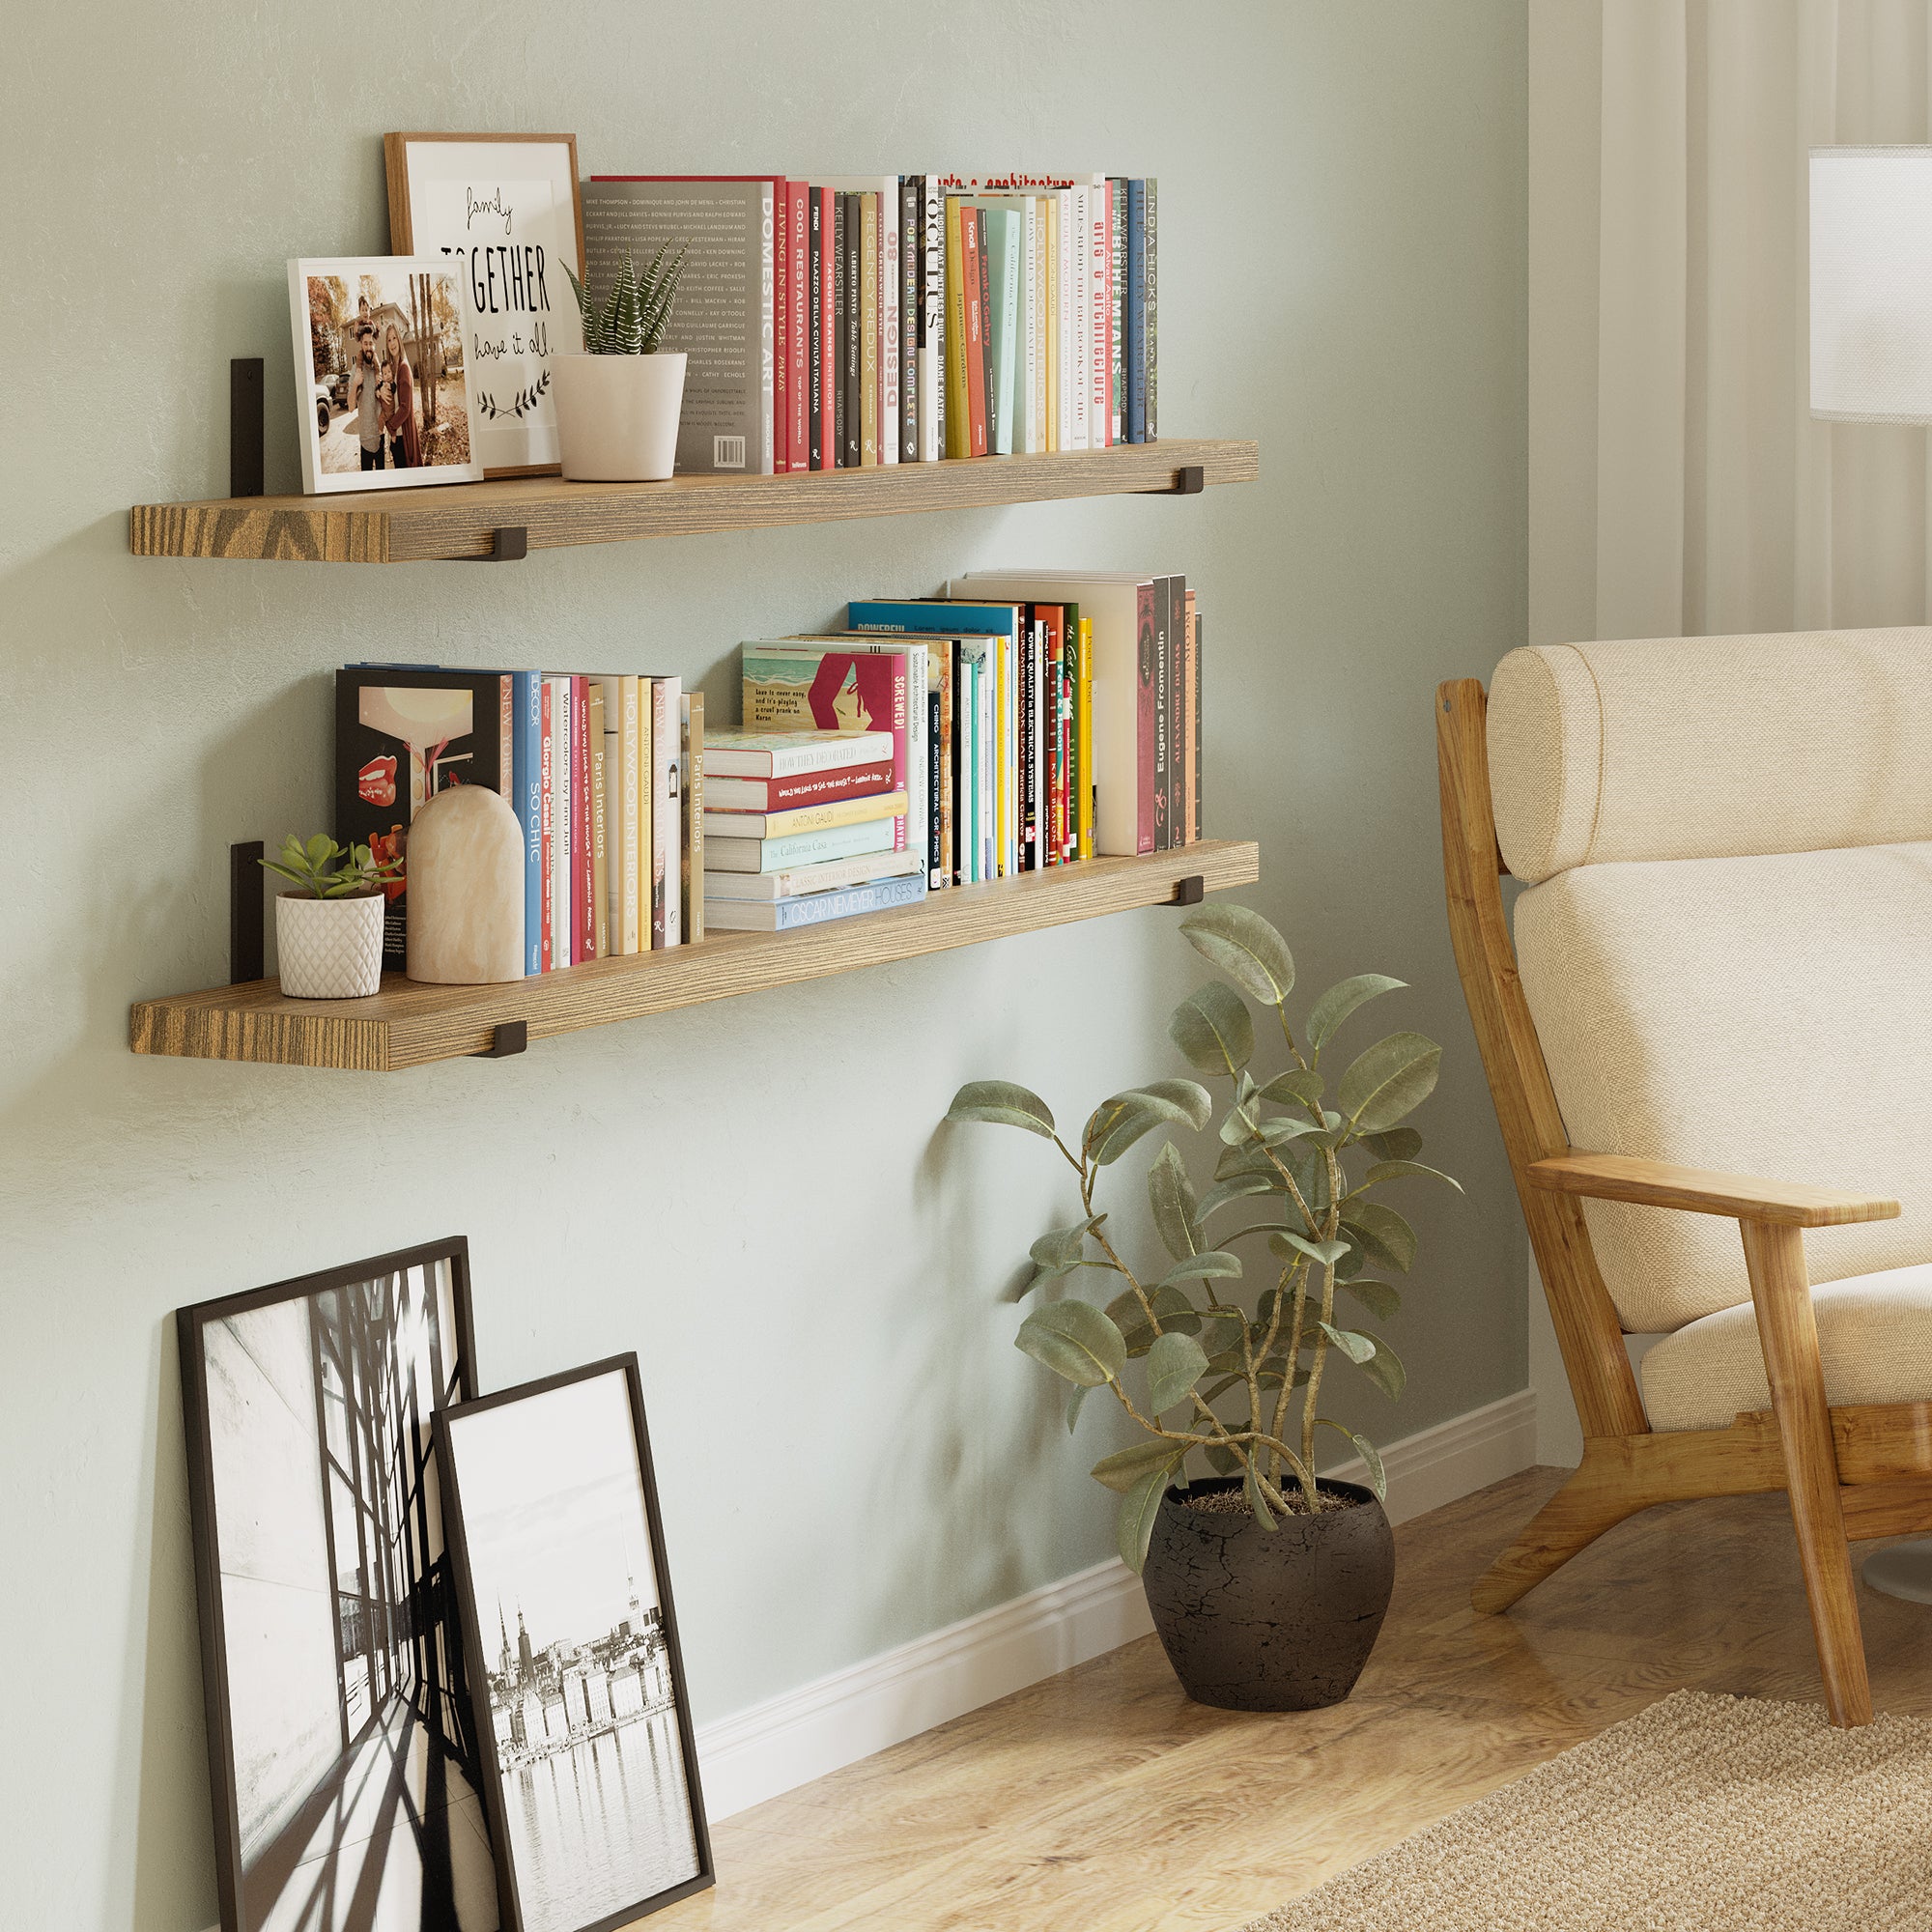 Shelves for wall against a textured wall filled with books, plants, and framed photos, creating a cozy and literary corner.